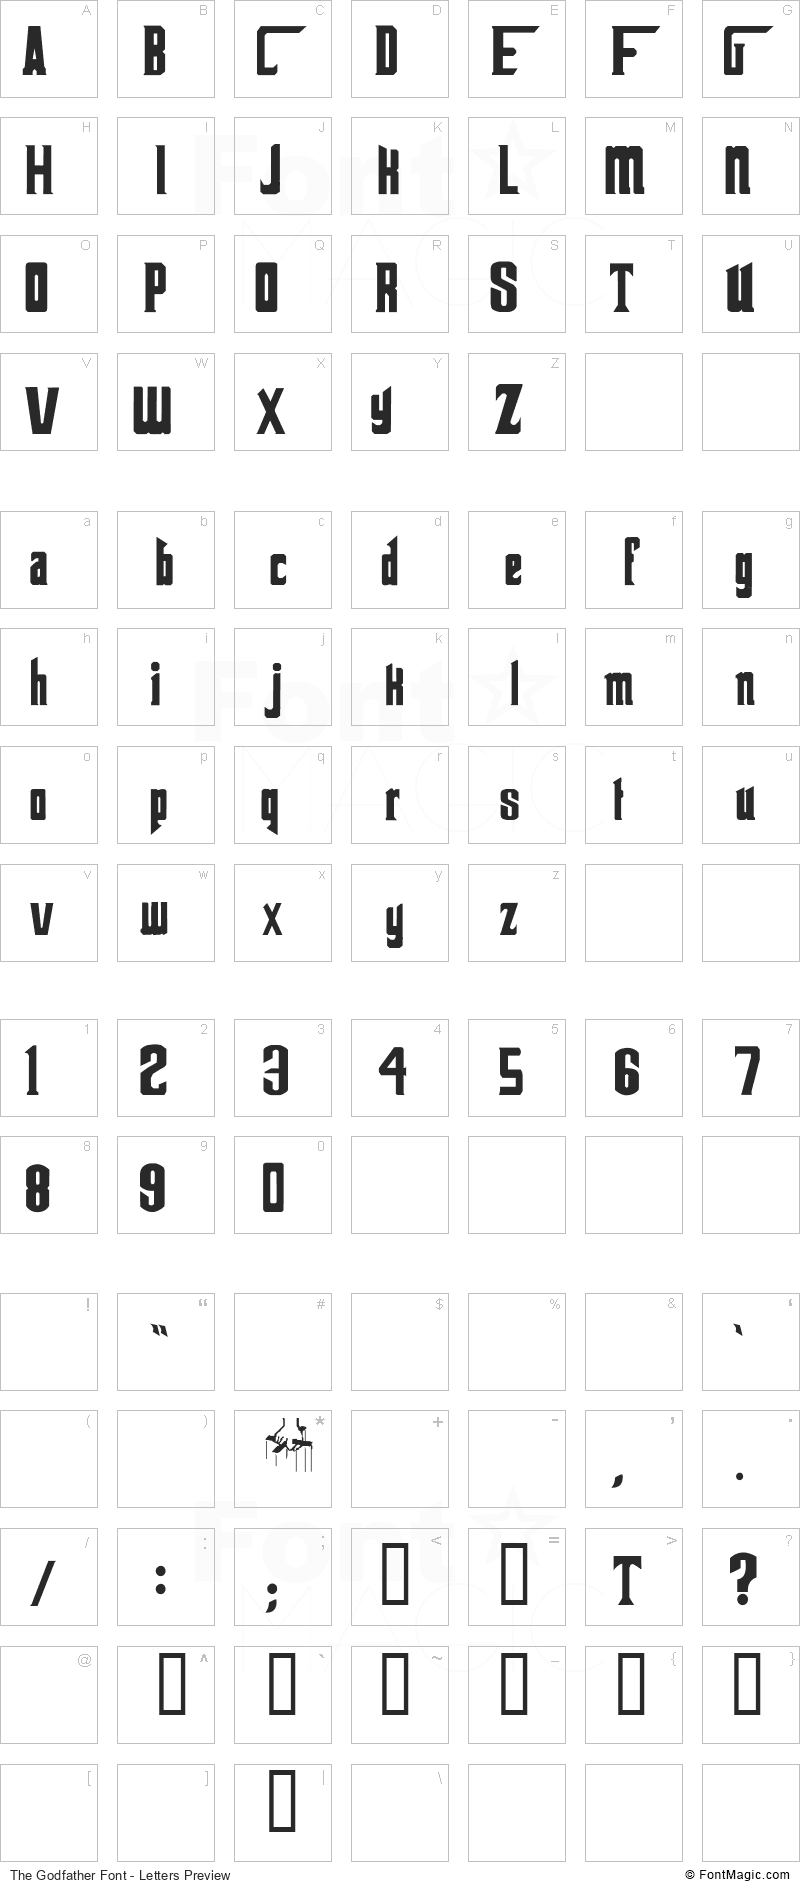 The Godfather Font - All Latters Preview Chart